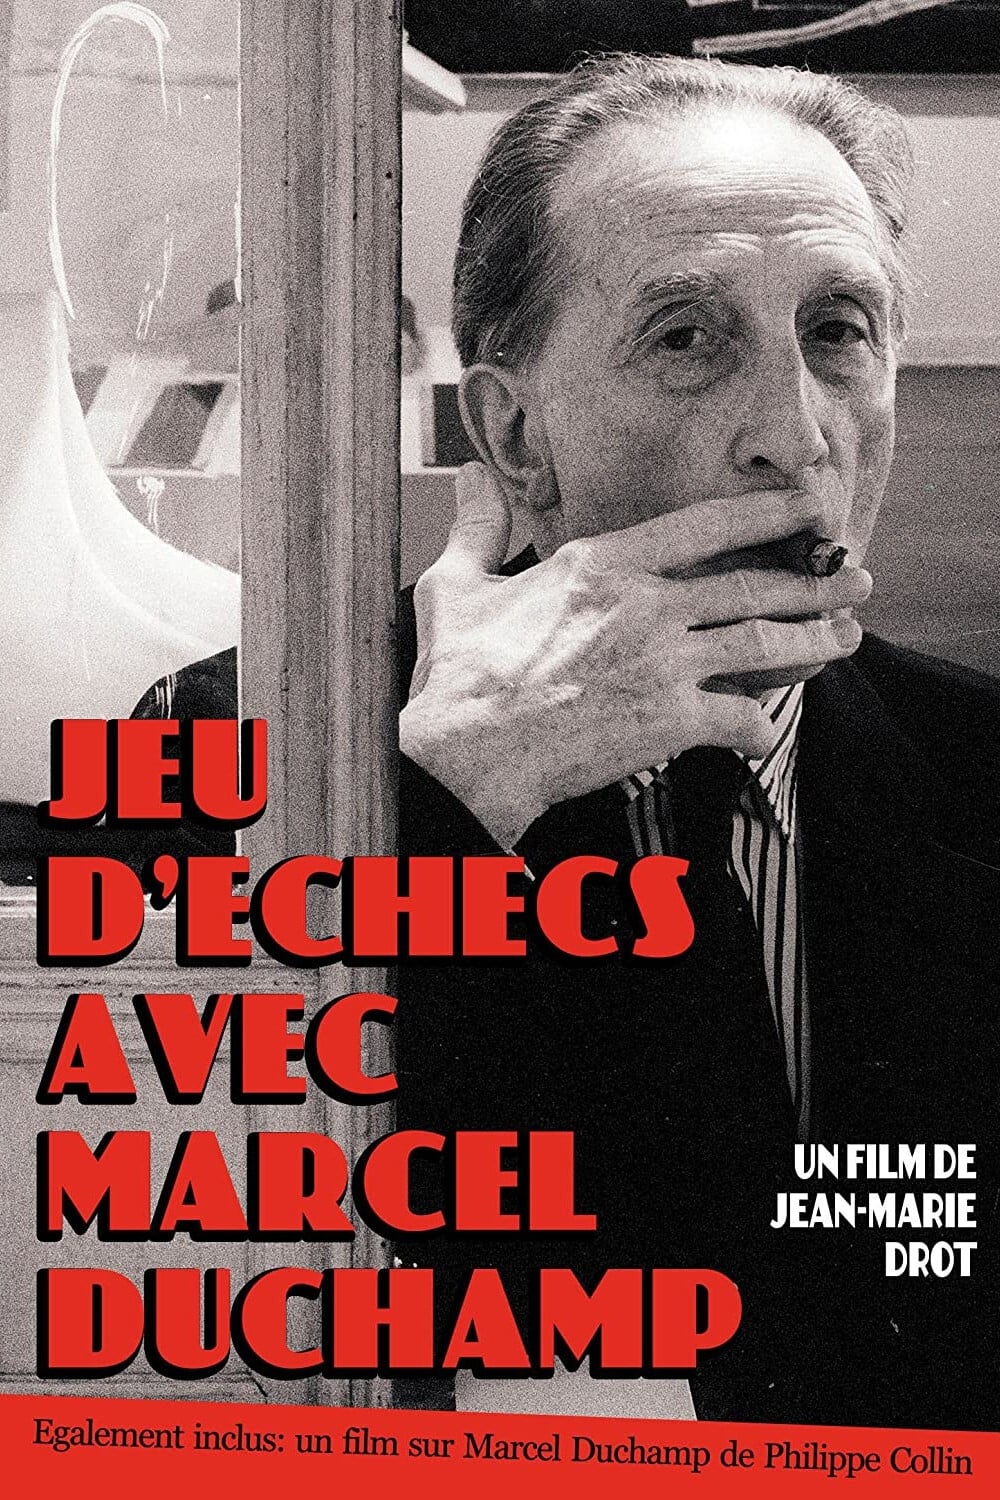 Marcel Duchamp: A Game of Chess